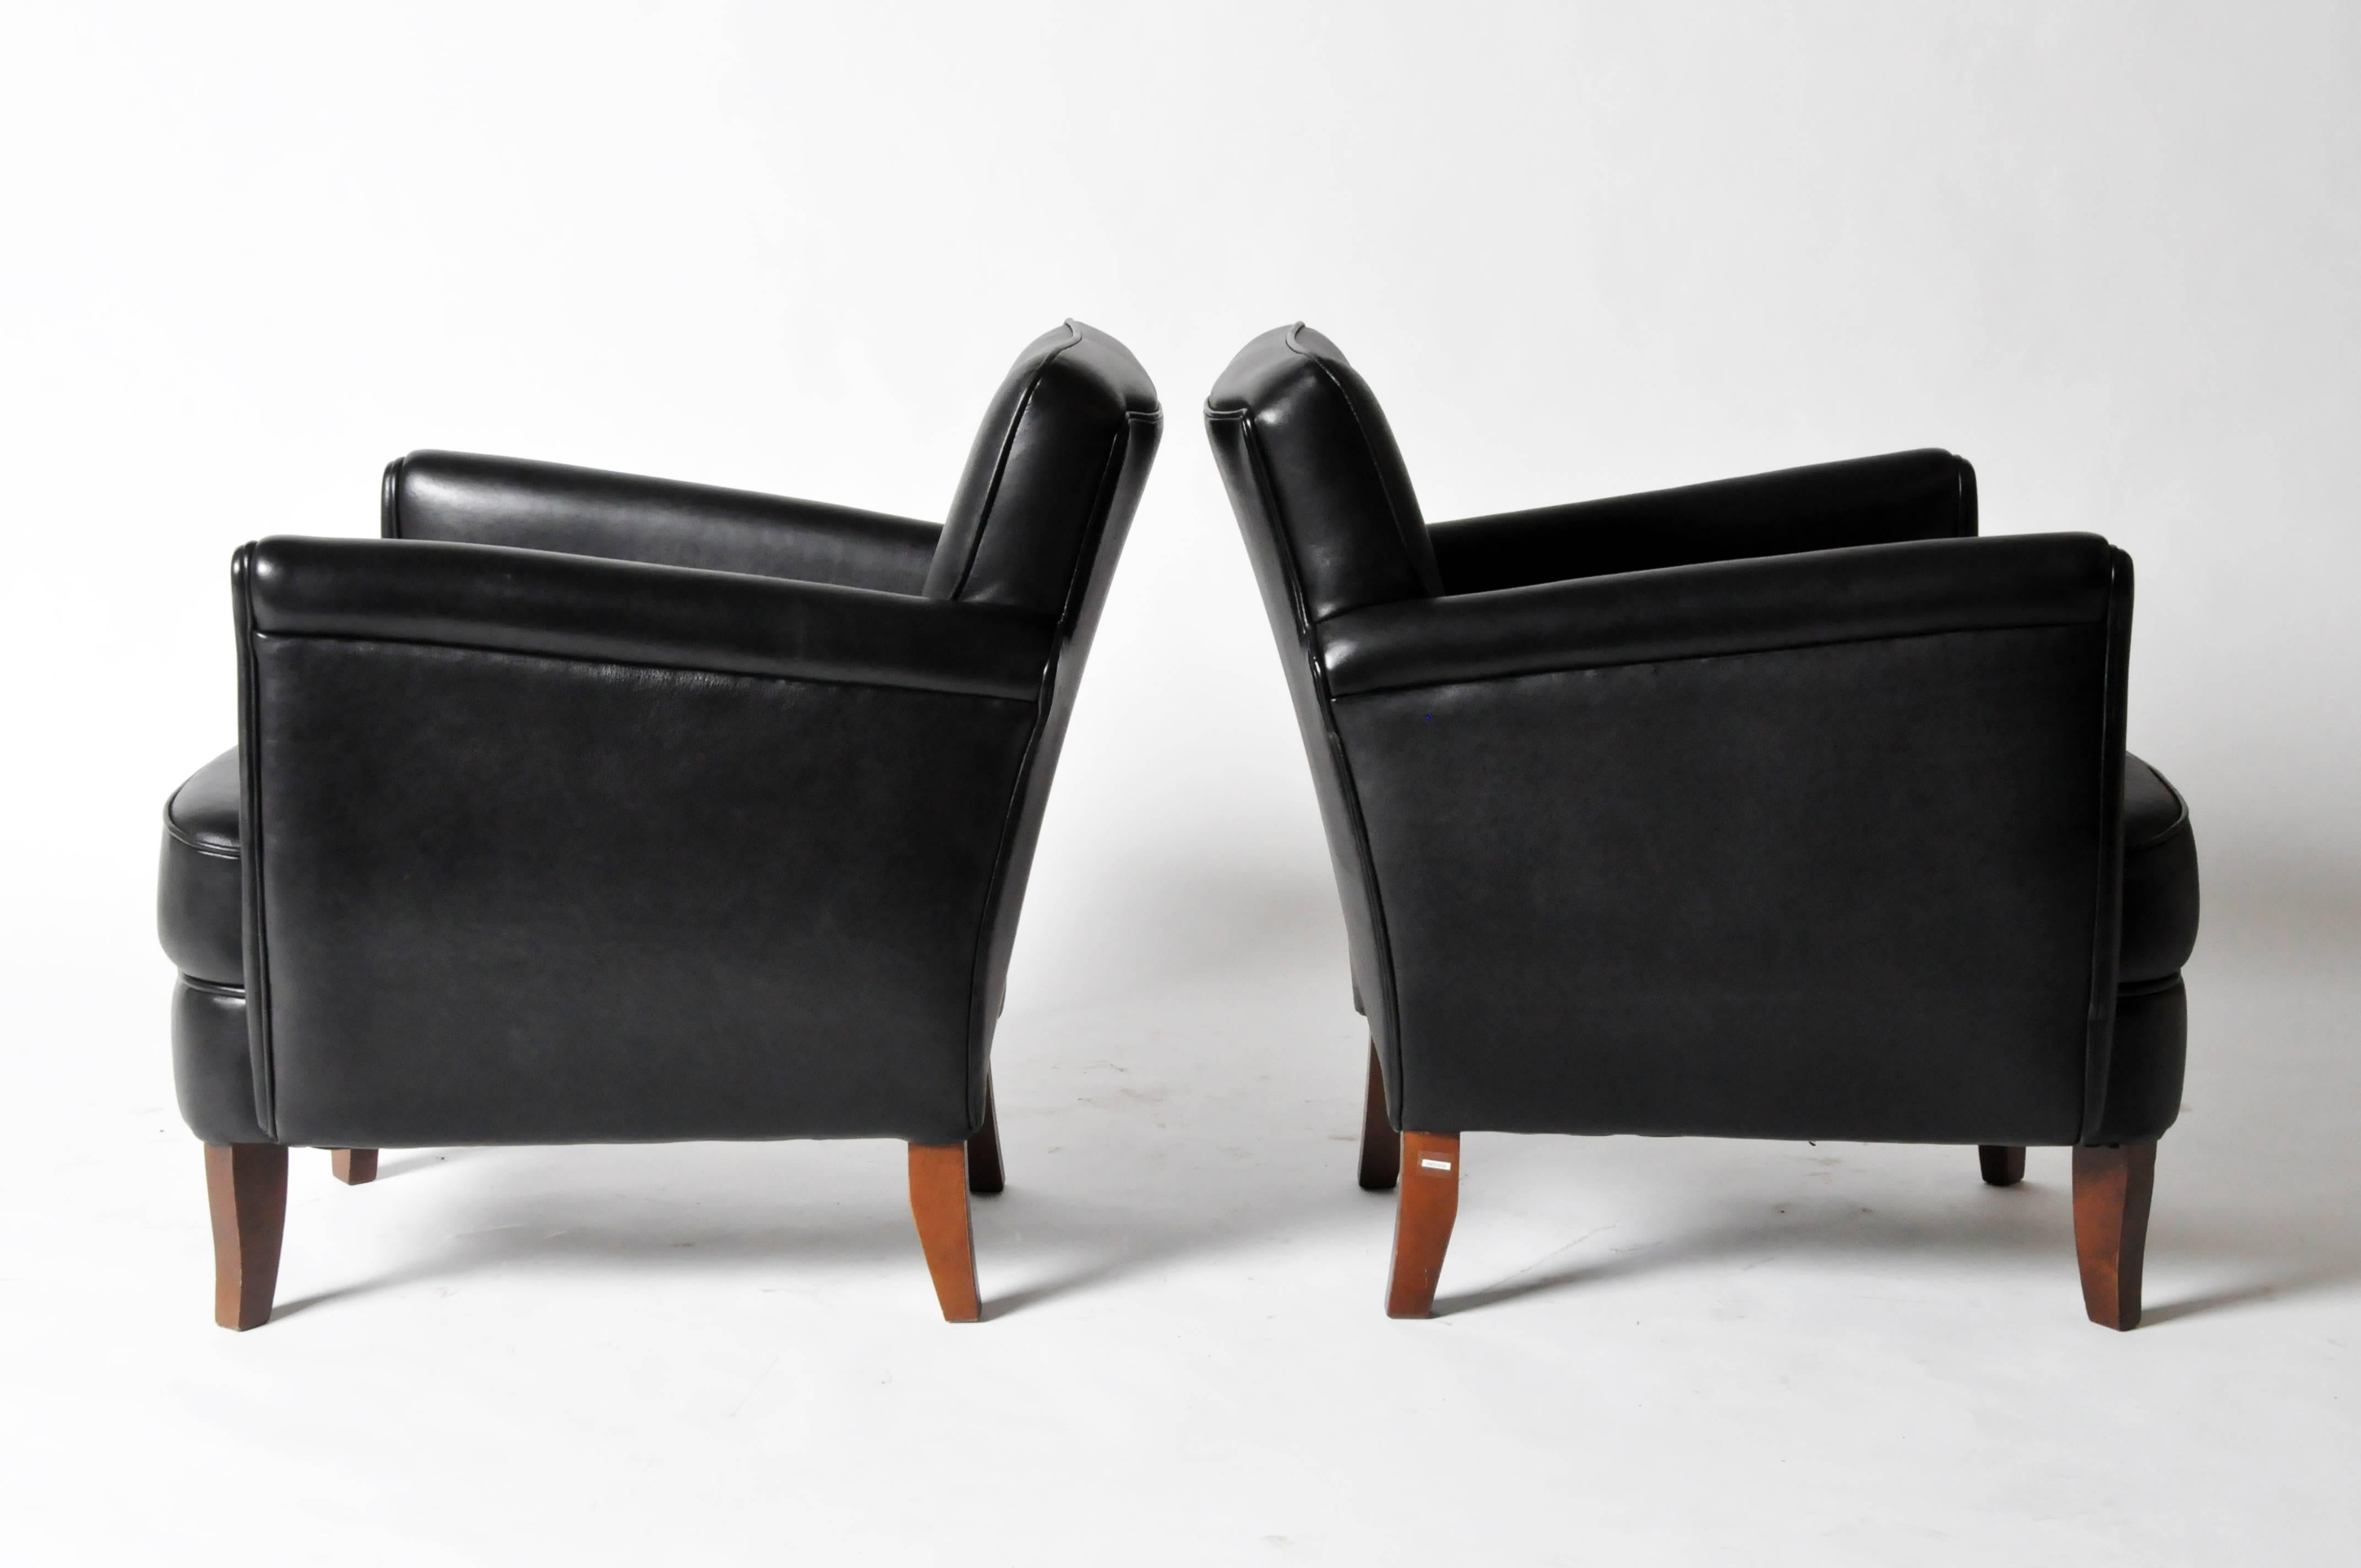 These compact chairs are upholstered in black leather and raised on square wooden legs.